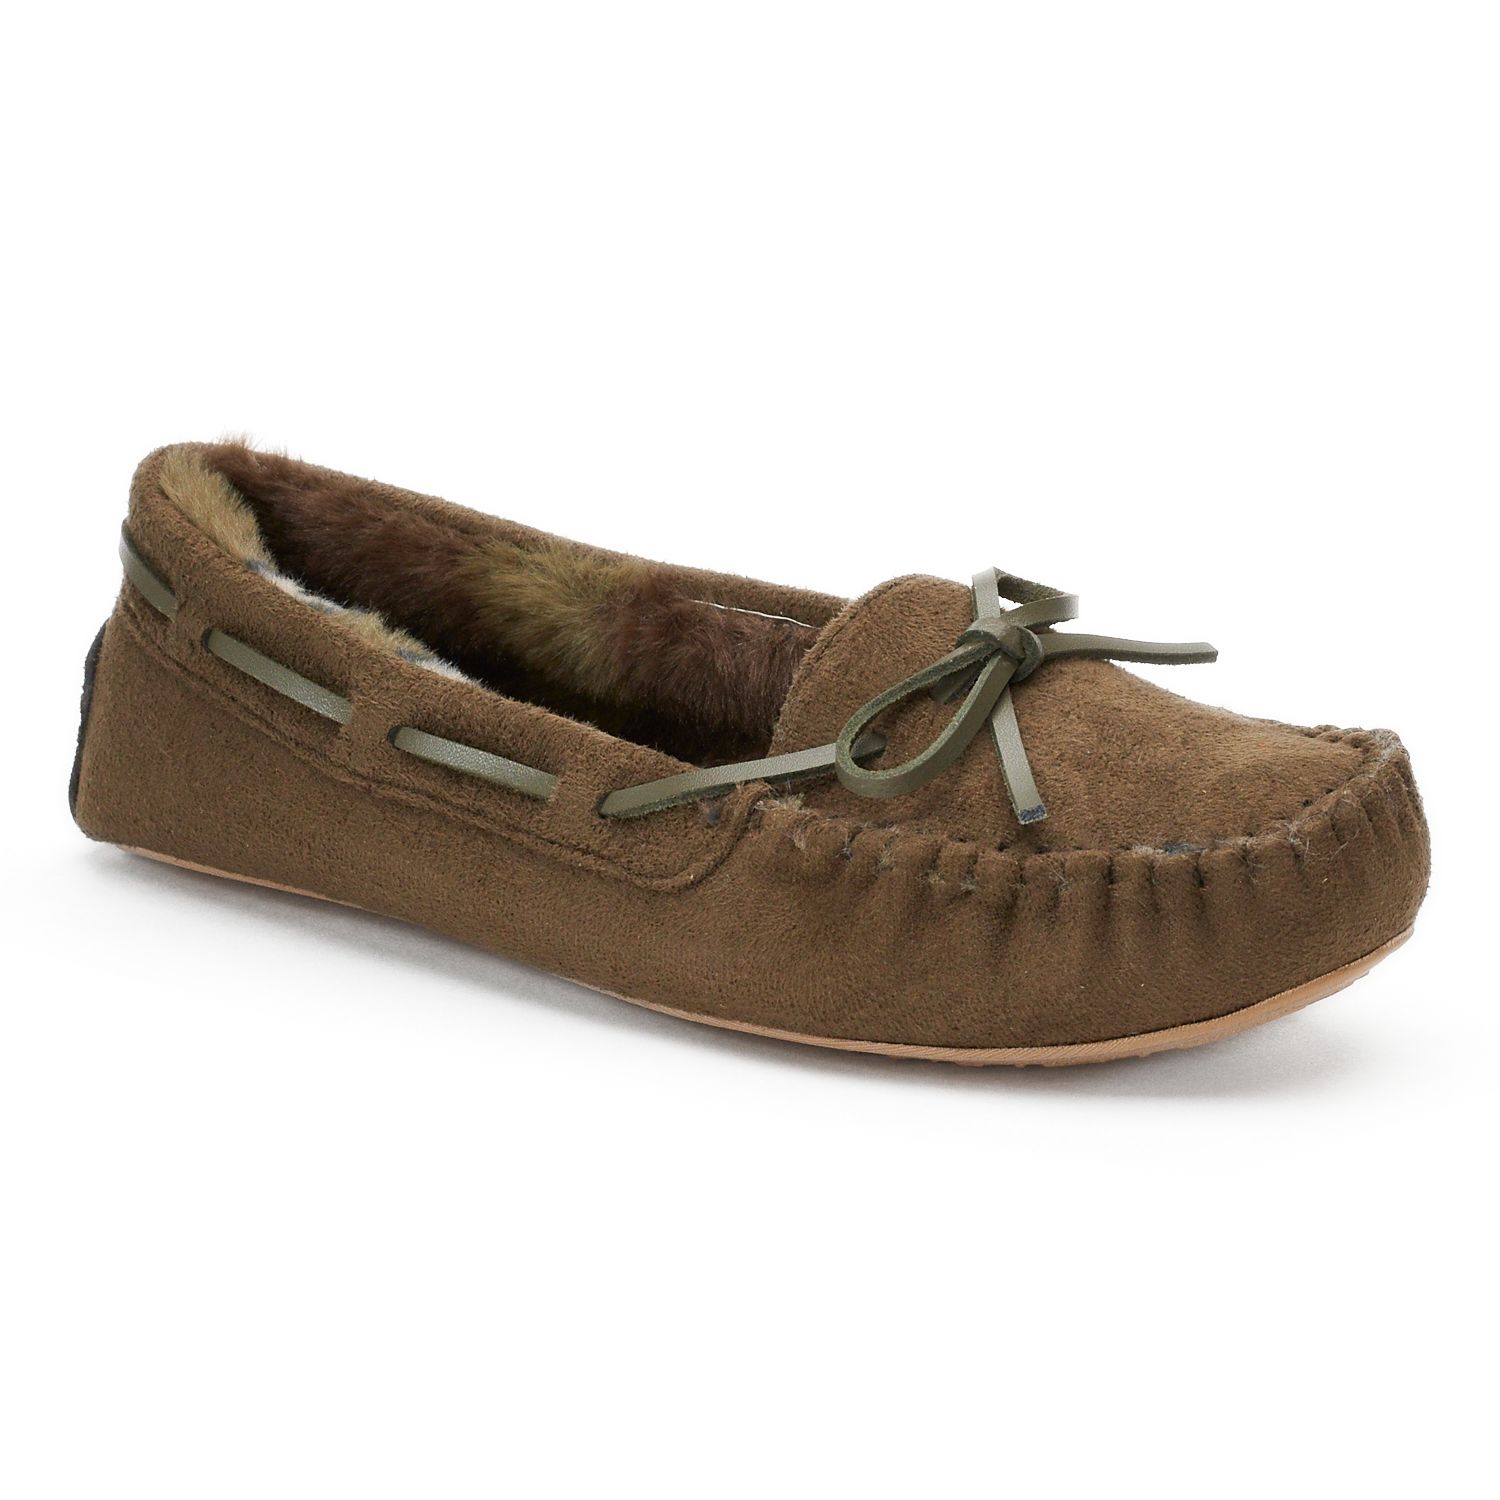 so moccasin slippers